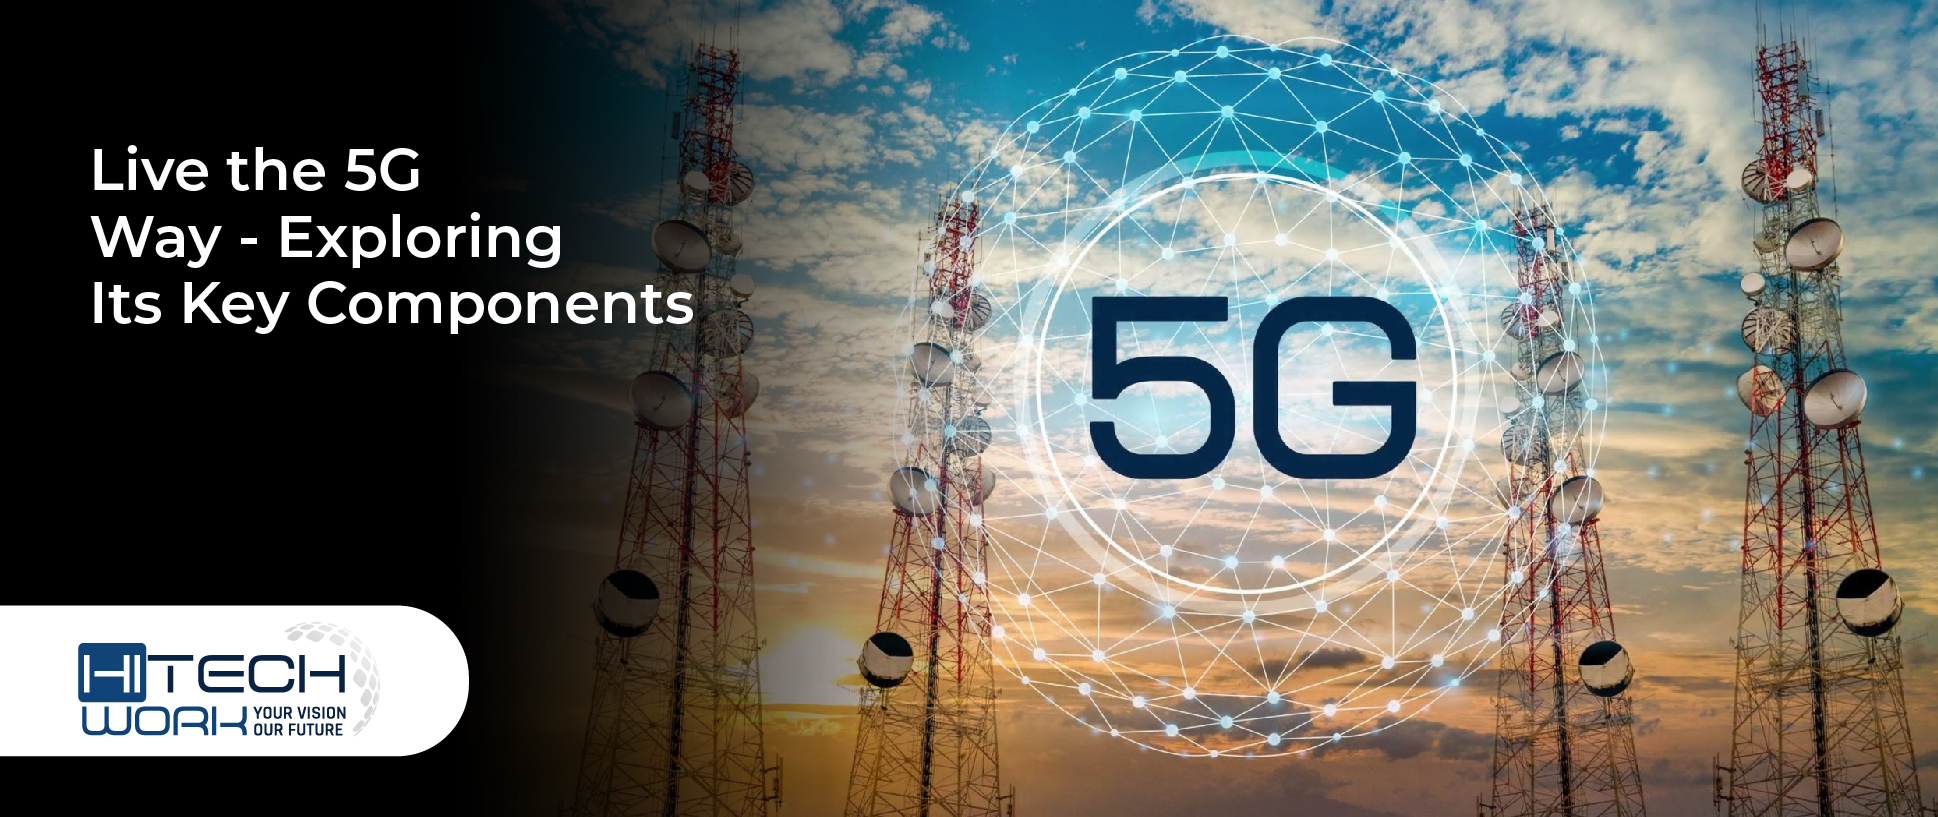 Live the 5G Way